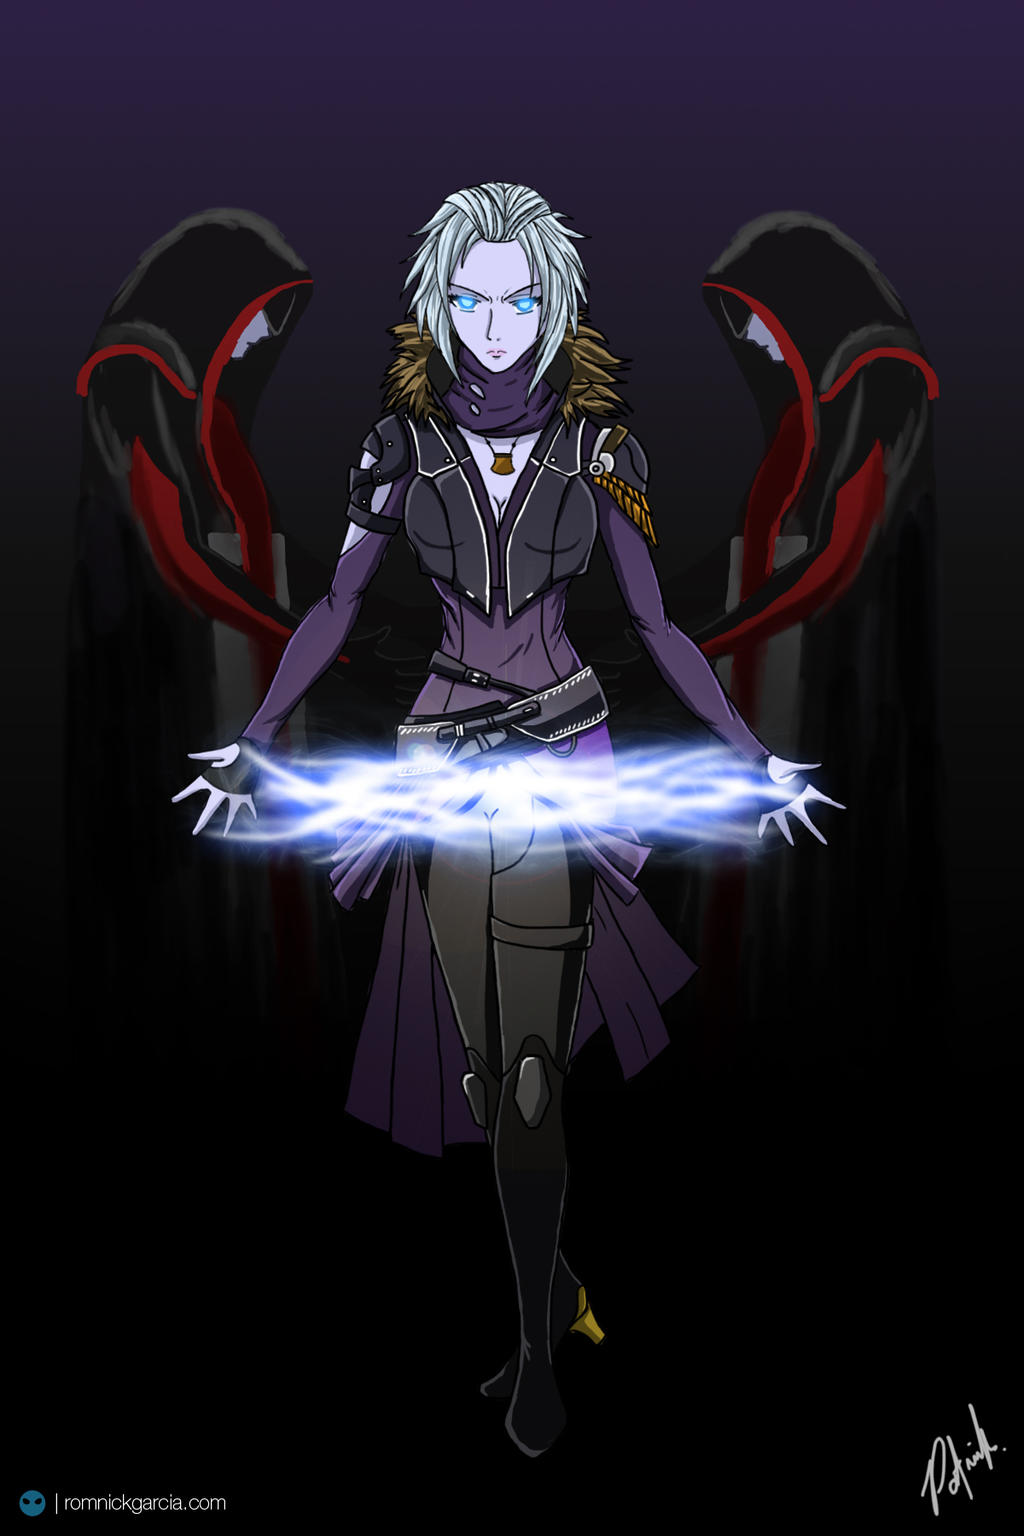 Mara Sov Bows To No One.. submitted by patgarci > Community